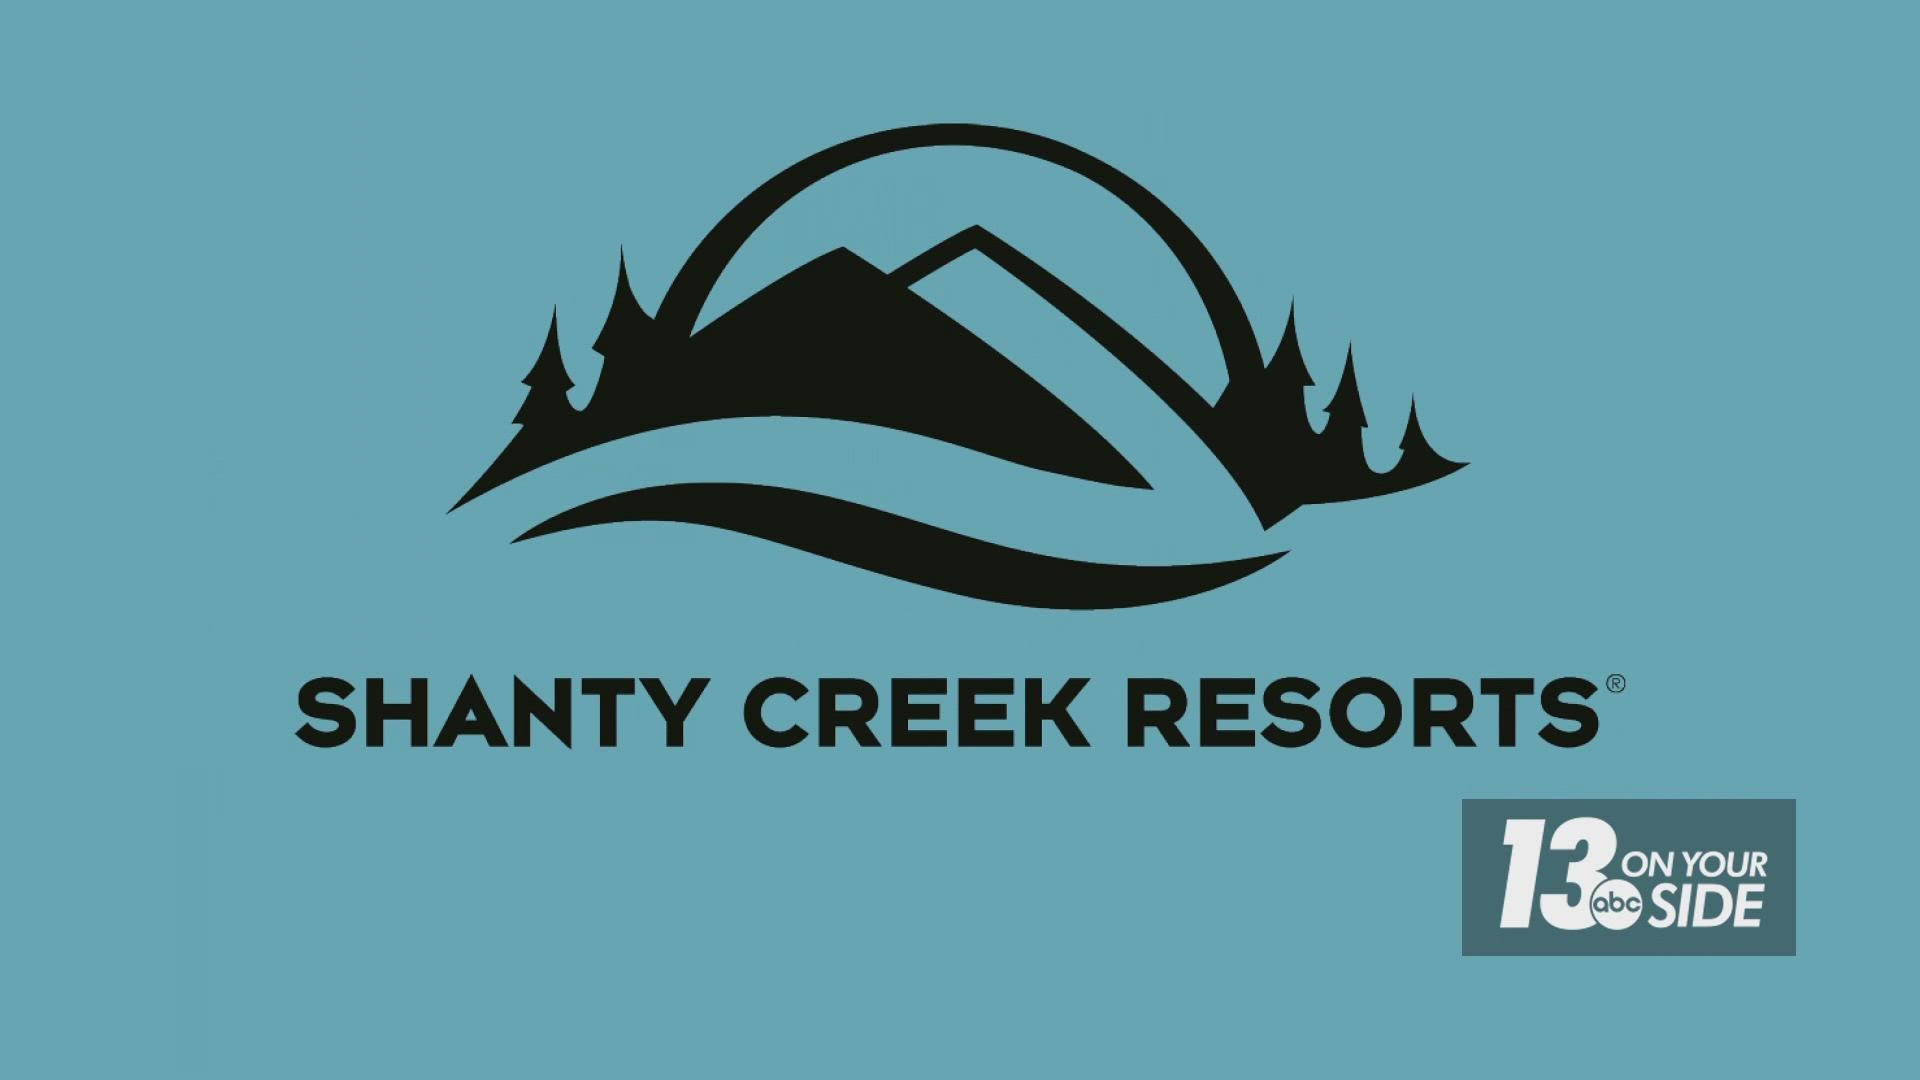 Lindsey Southwell is the Director of Marketing at Shanty Creek and she gave us the lay of the land.